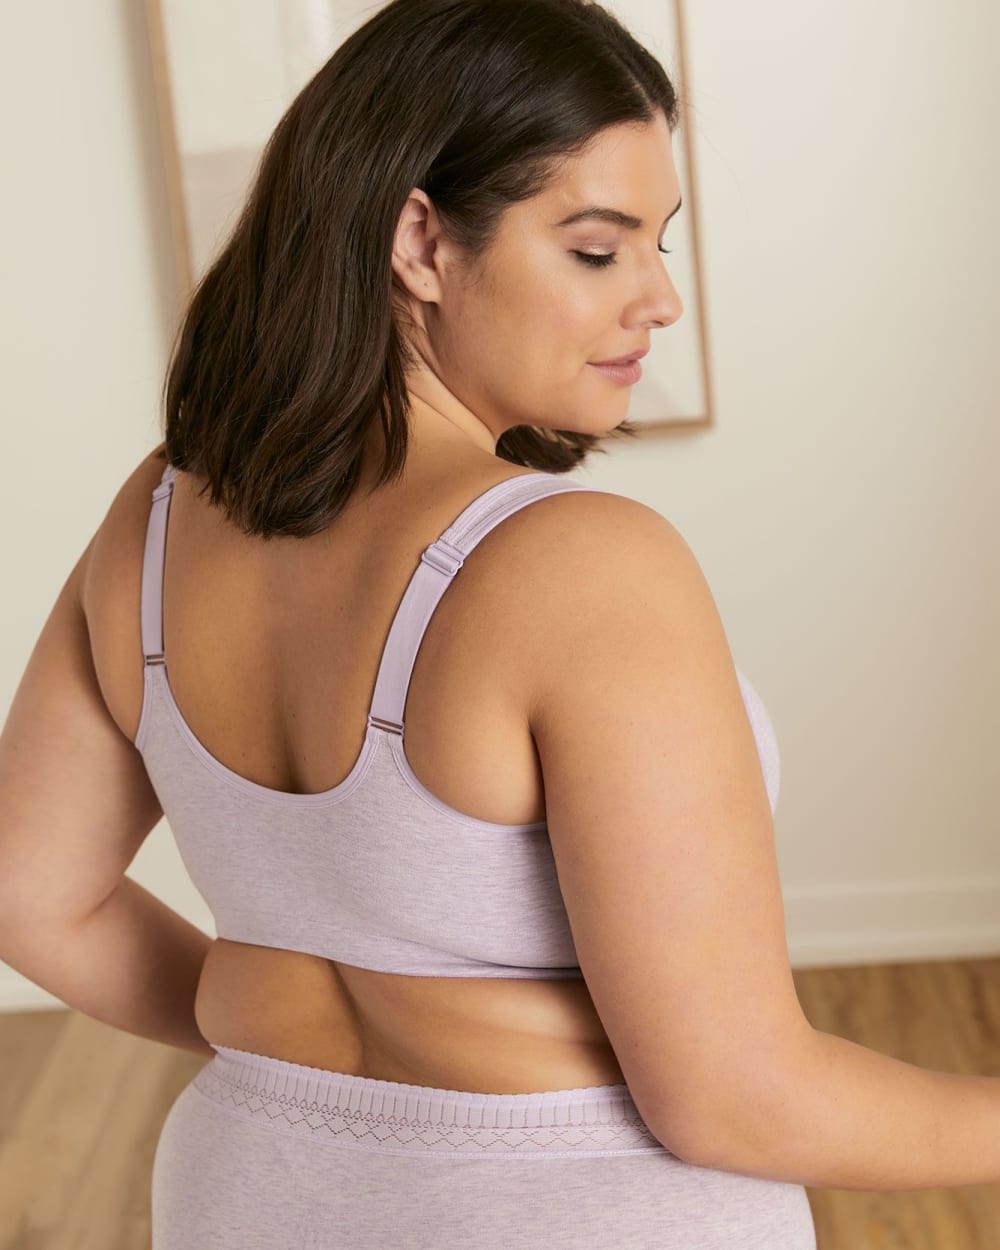 Awesom Fit Bra - CamiLace - Comfort Wireless Front Close Bra